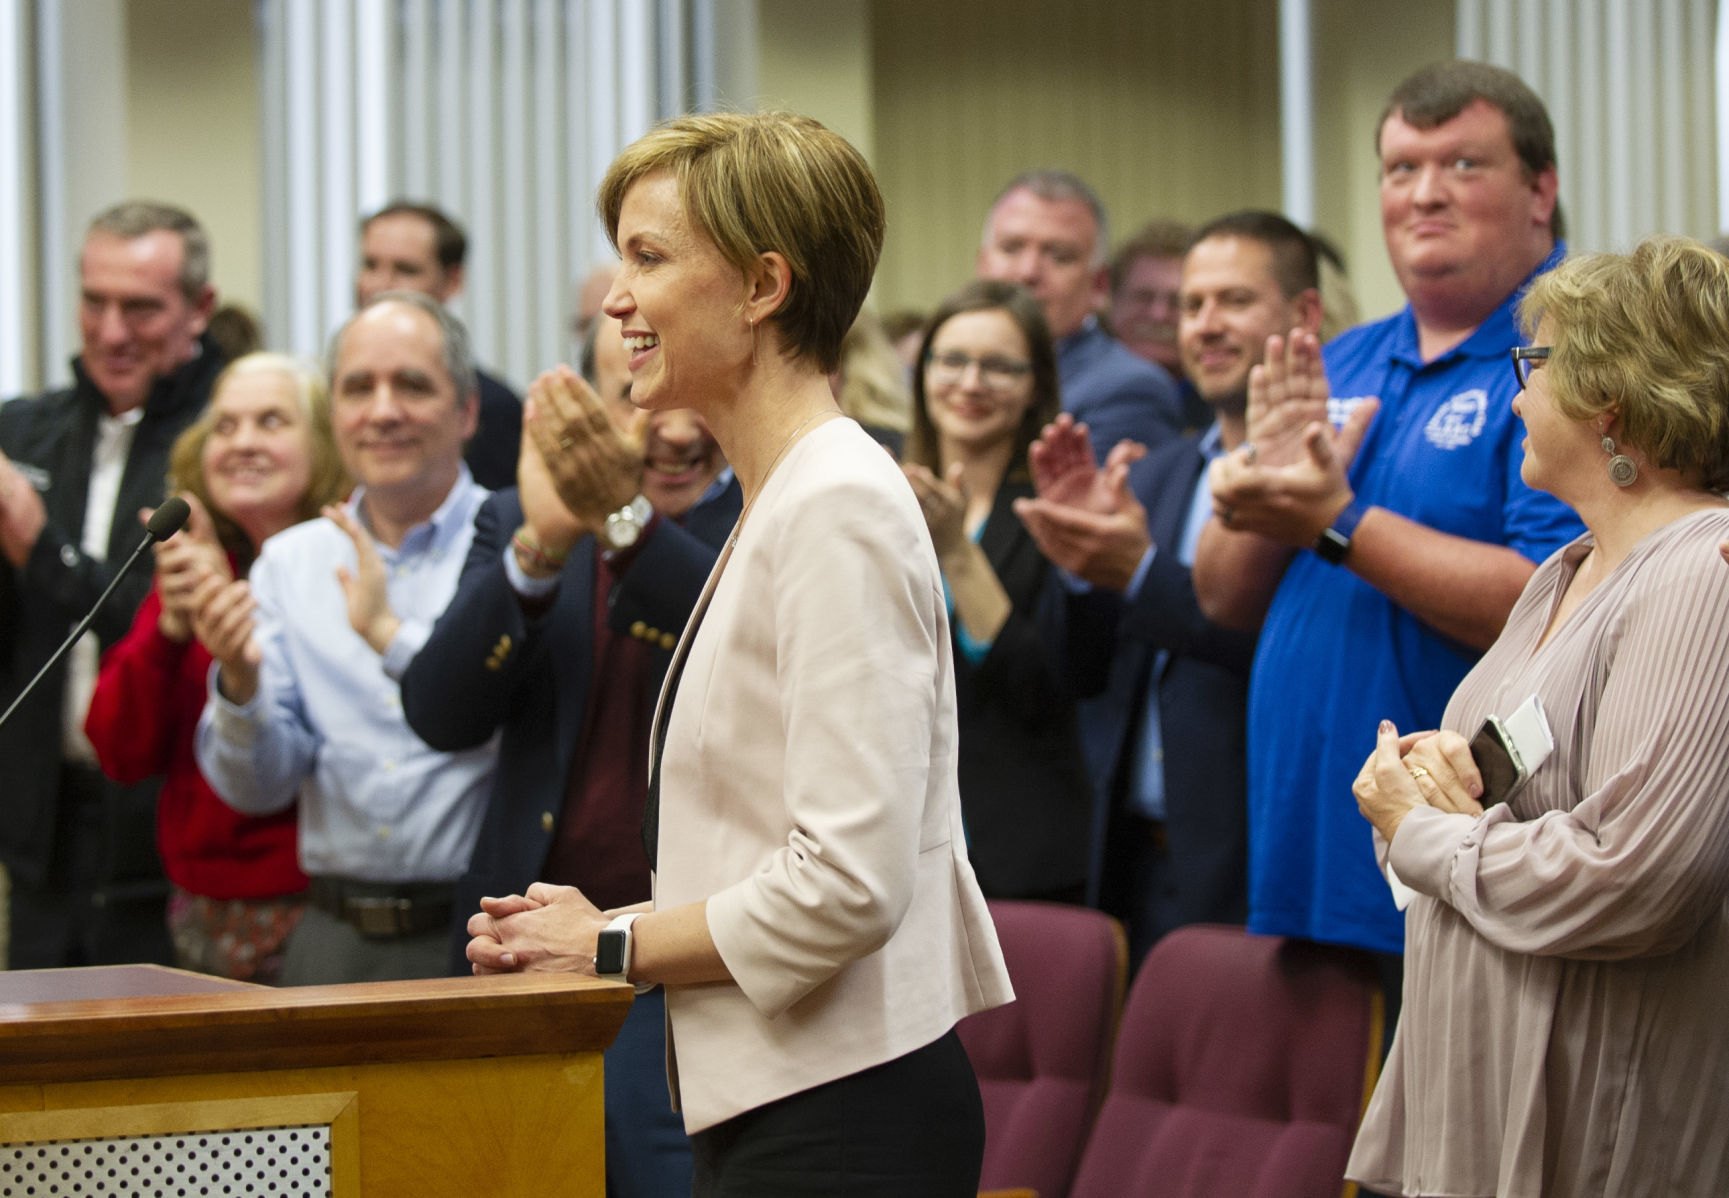 Progress heralded as Lincoln swears in Gaylor Baird, city's third